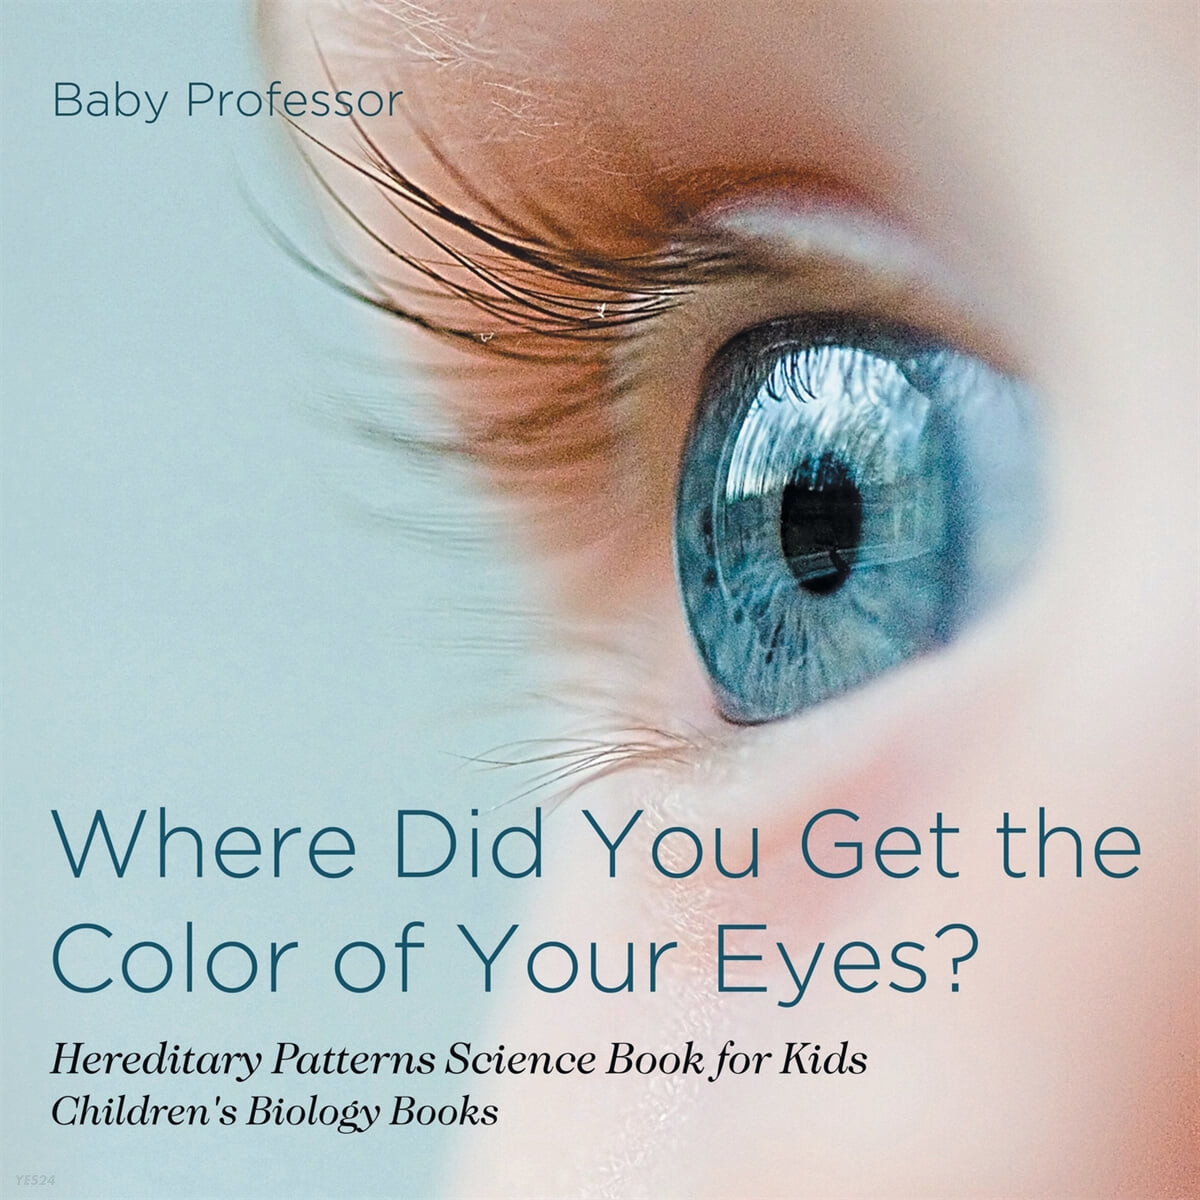 Where Did You Get the Color of Your Eyes? - Hereditary Patterns Science Book for Kids - Children’s Biology Books